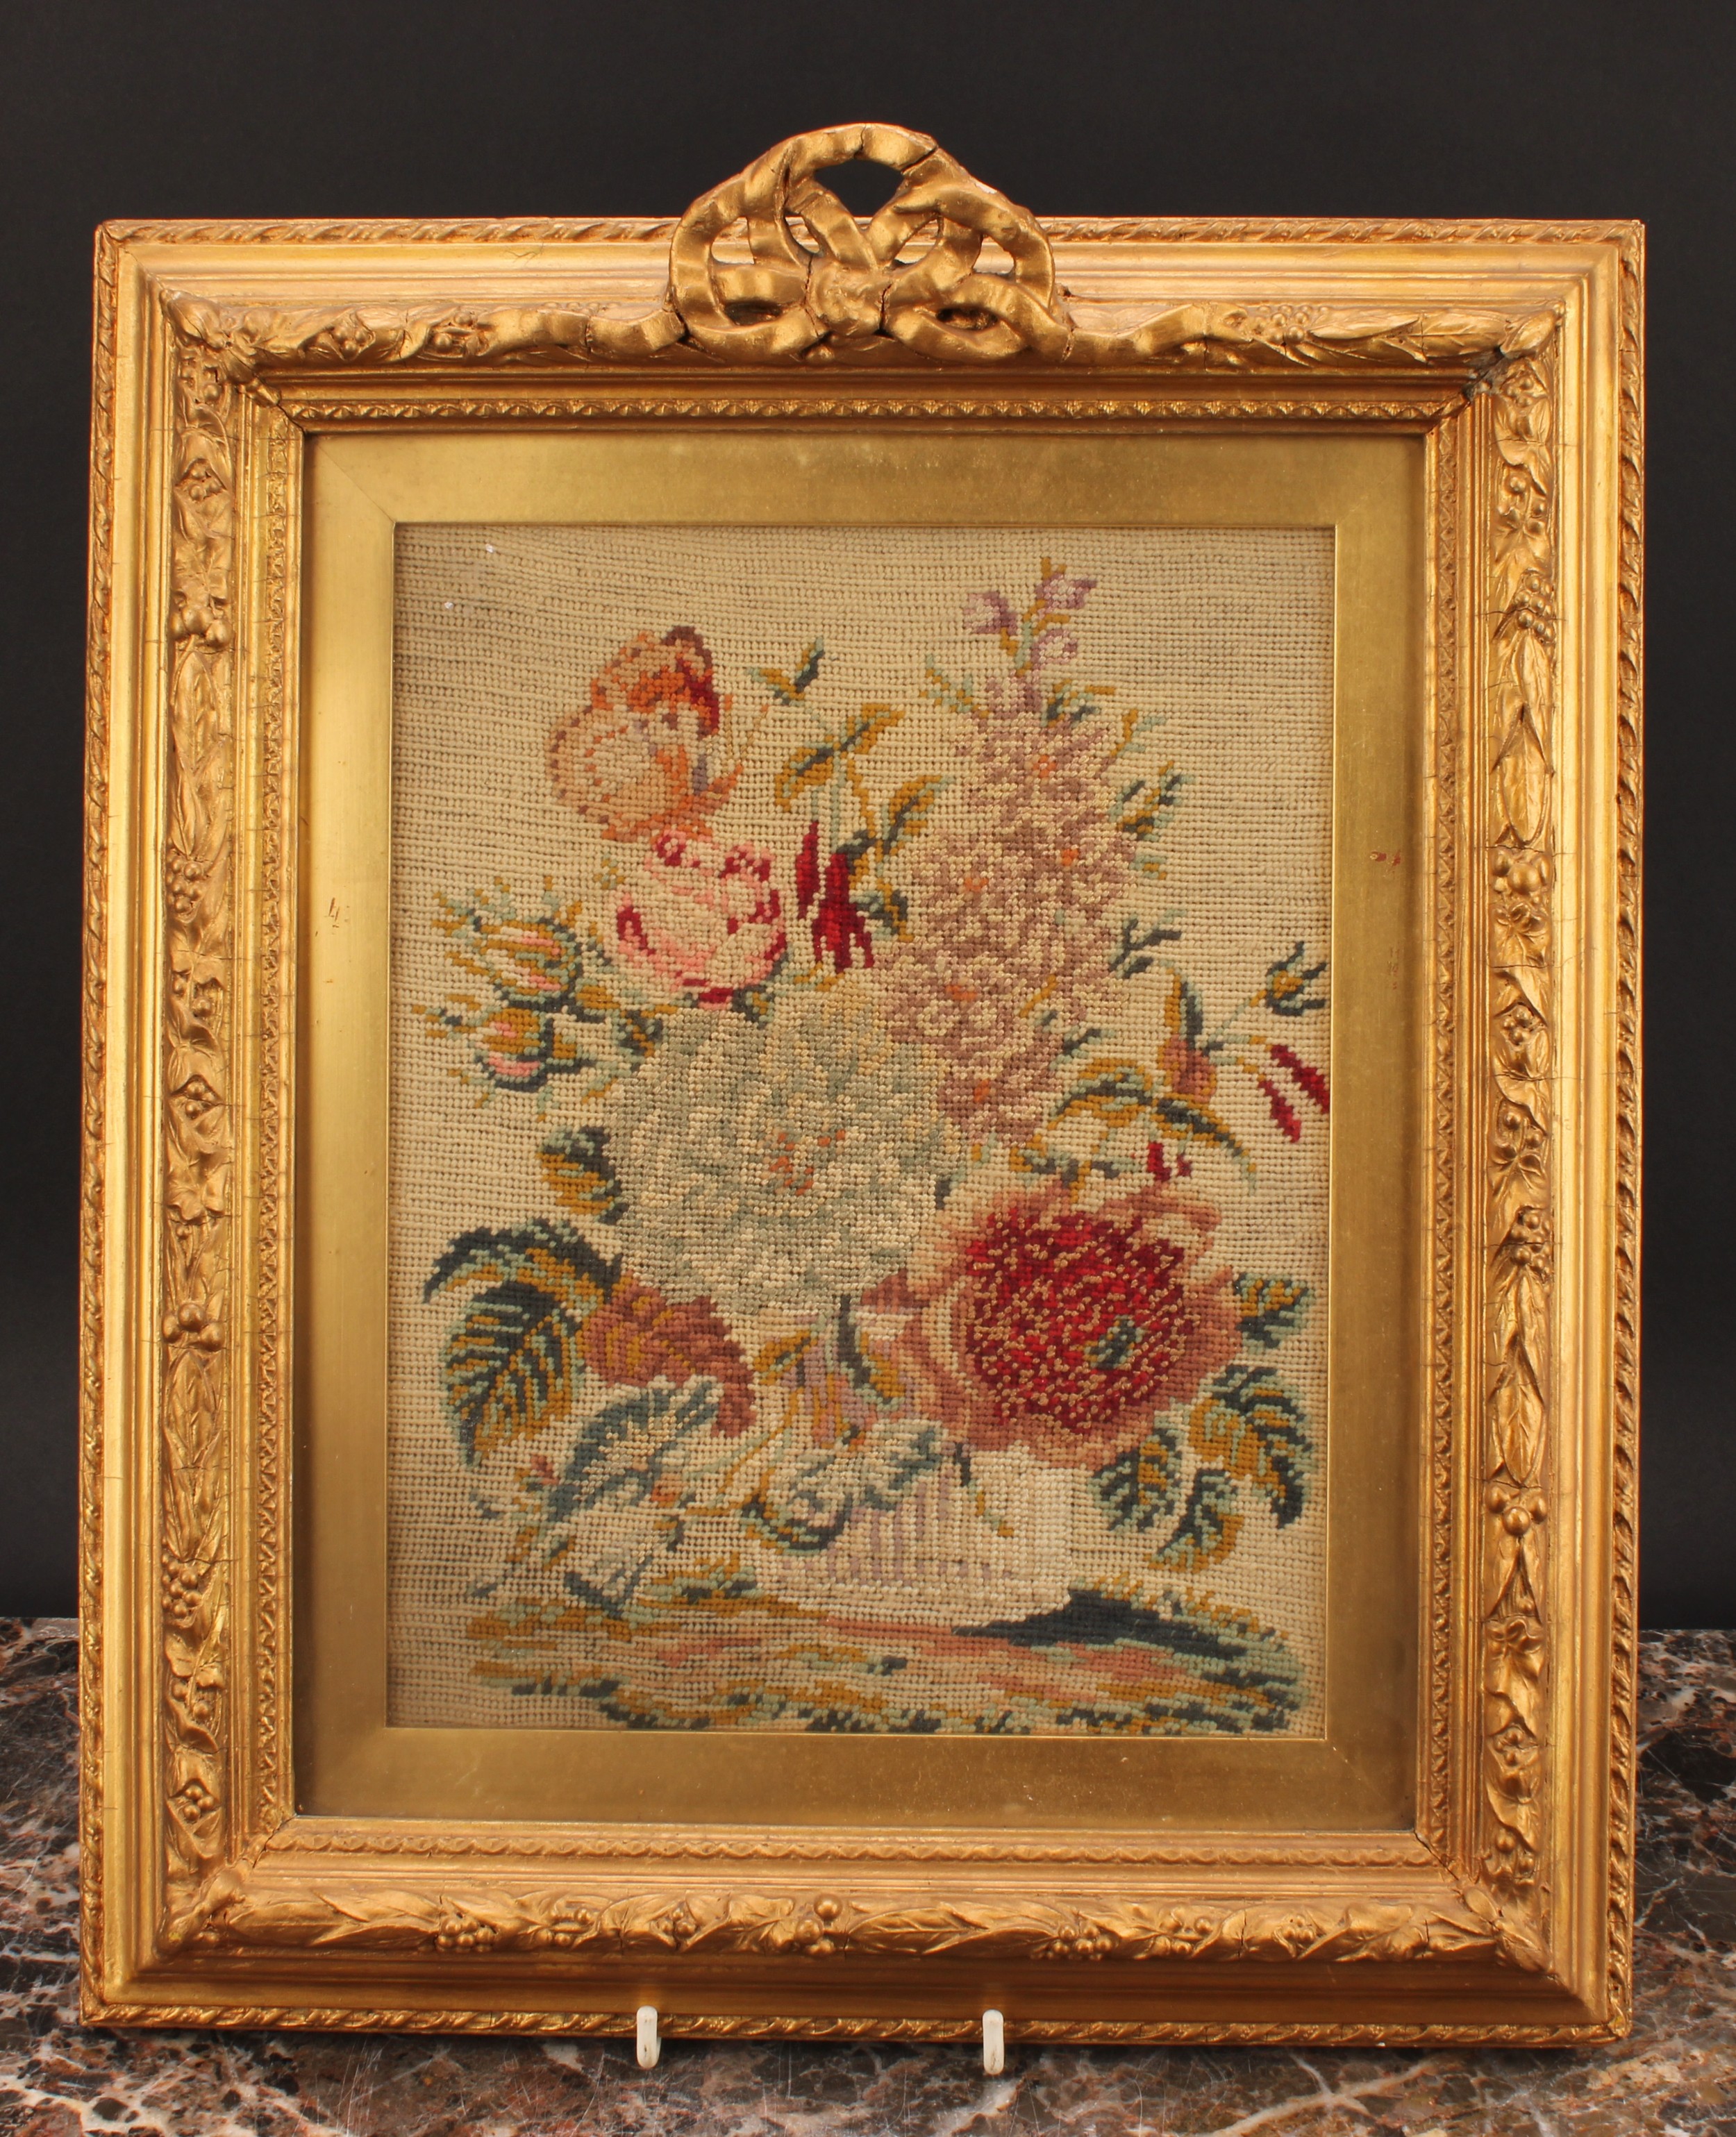 A 19th century woolwork panel, worked in colourful wools with study of flowers, rectangular giltwood - Image 3 of 4